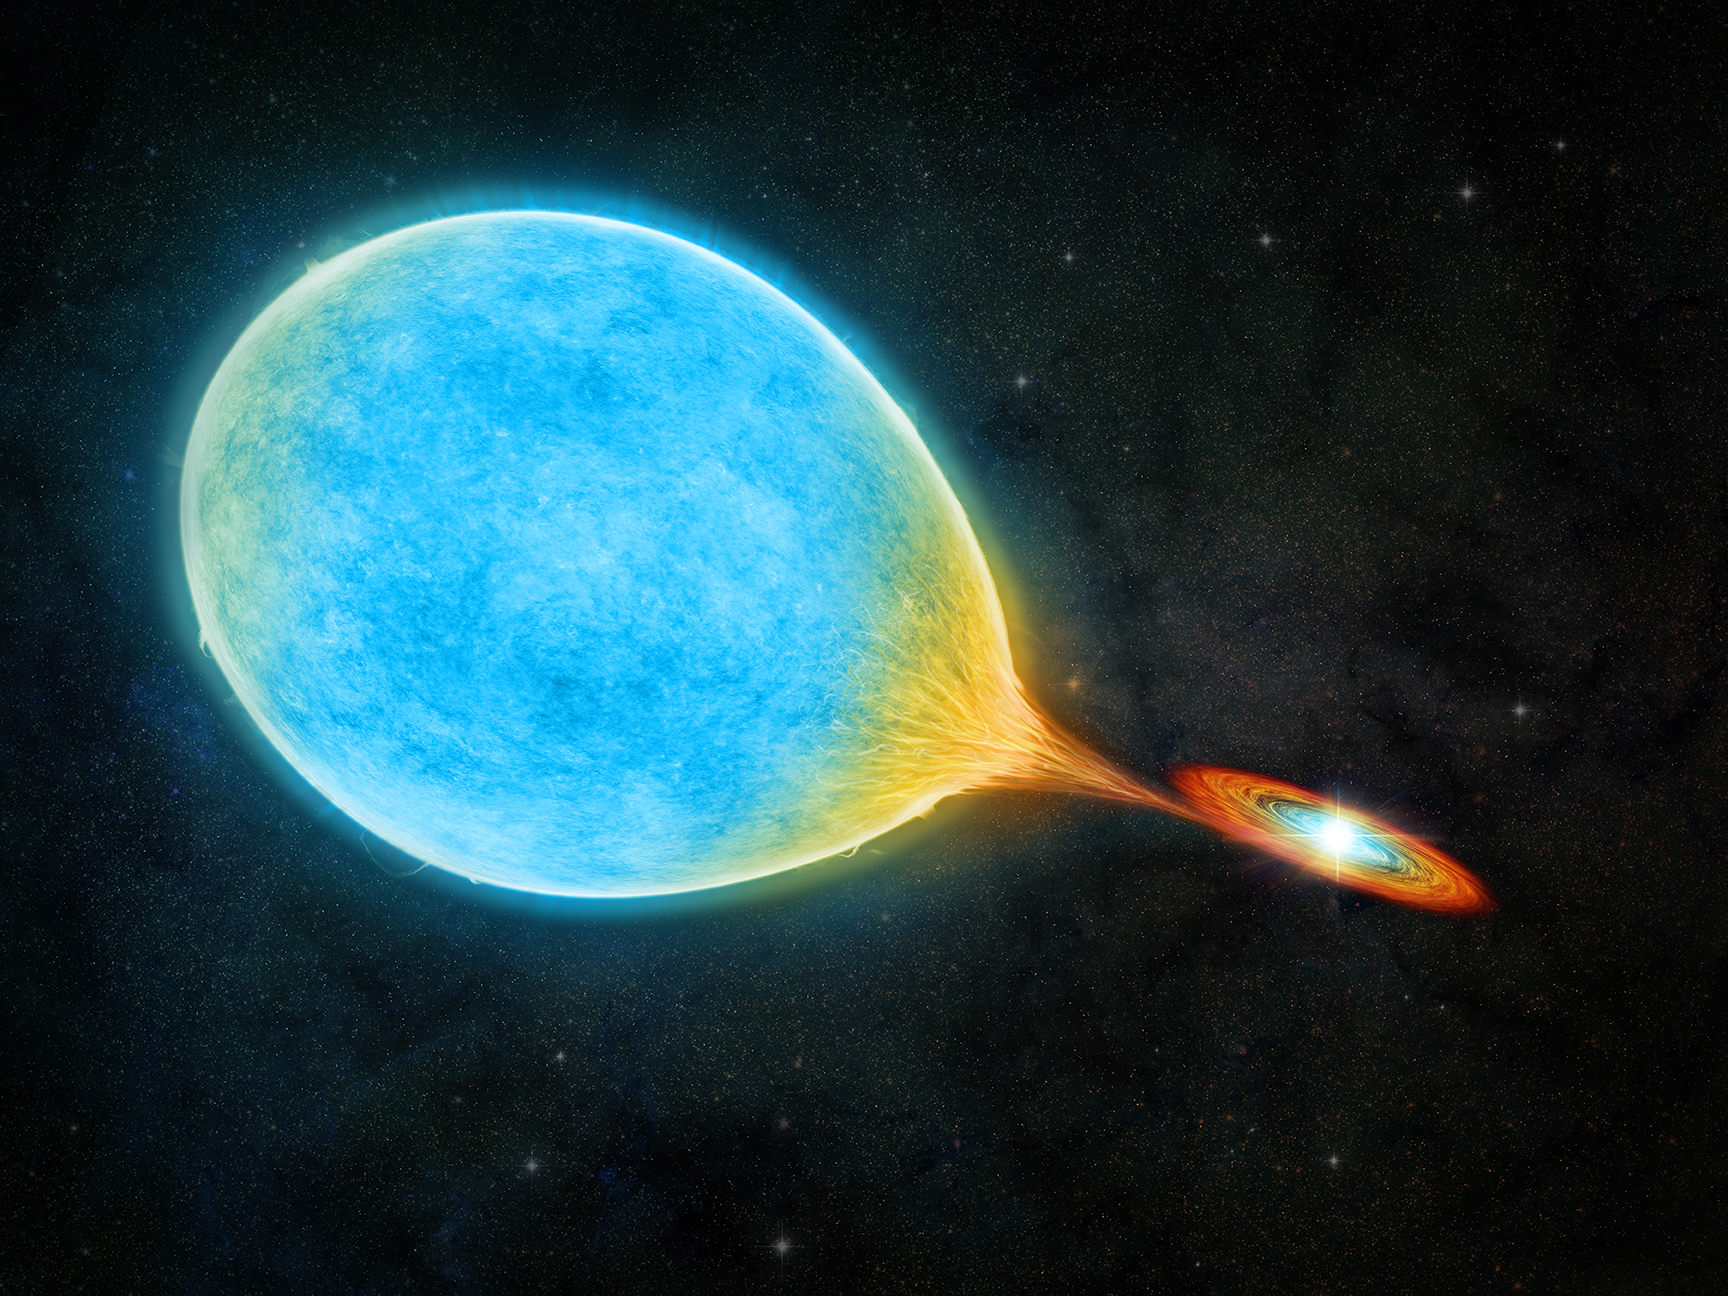 Artist's depiction of a new type of binary star: a pre-extremely low mass (ELM) white dwarf. Pictured in blue, the star is losing mass to a white dwarf companion and transitioning to an ELM white dwarf.